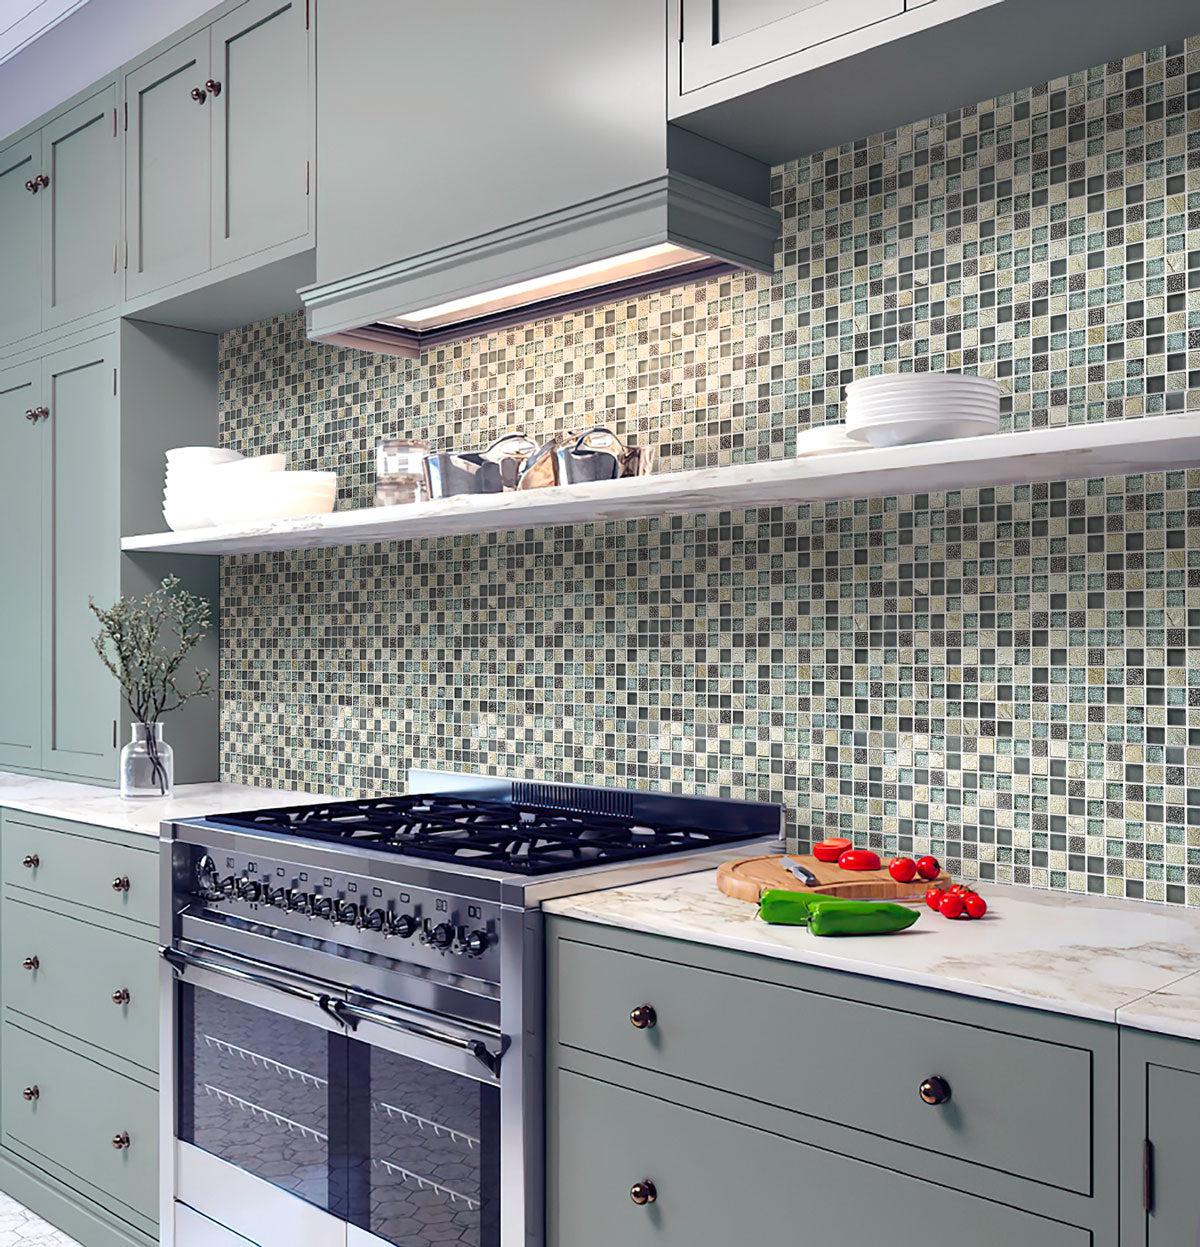 Green and white kitchen wall tile with mircro square pattern